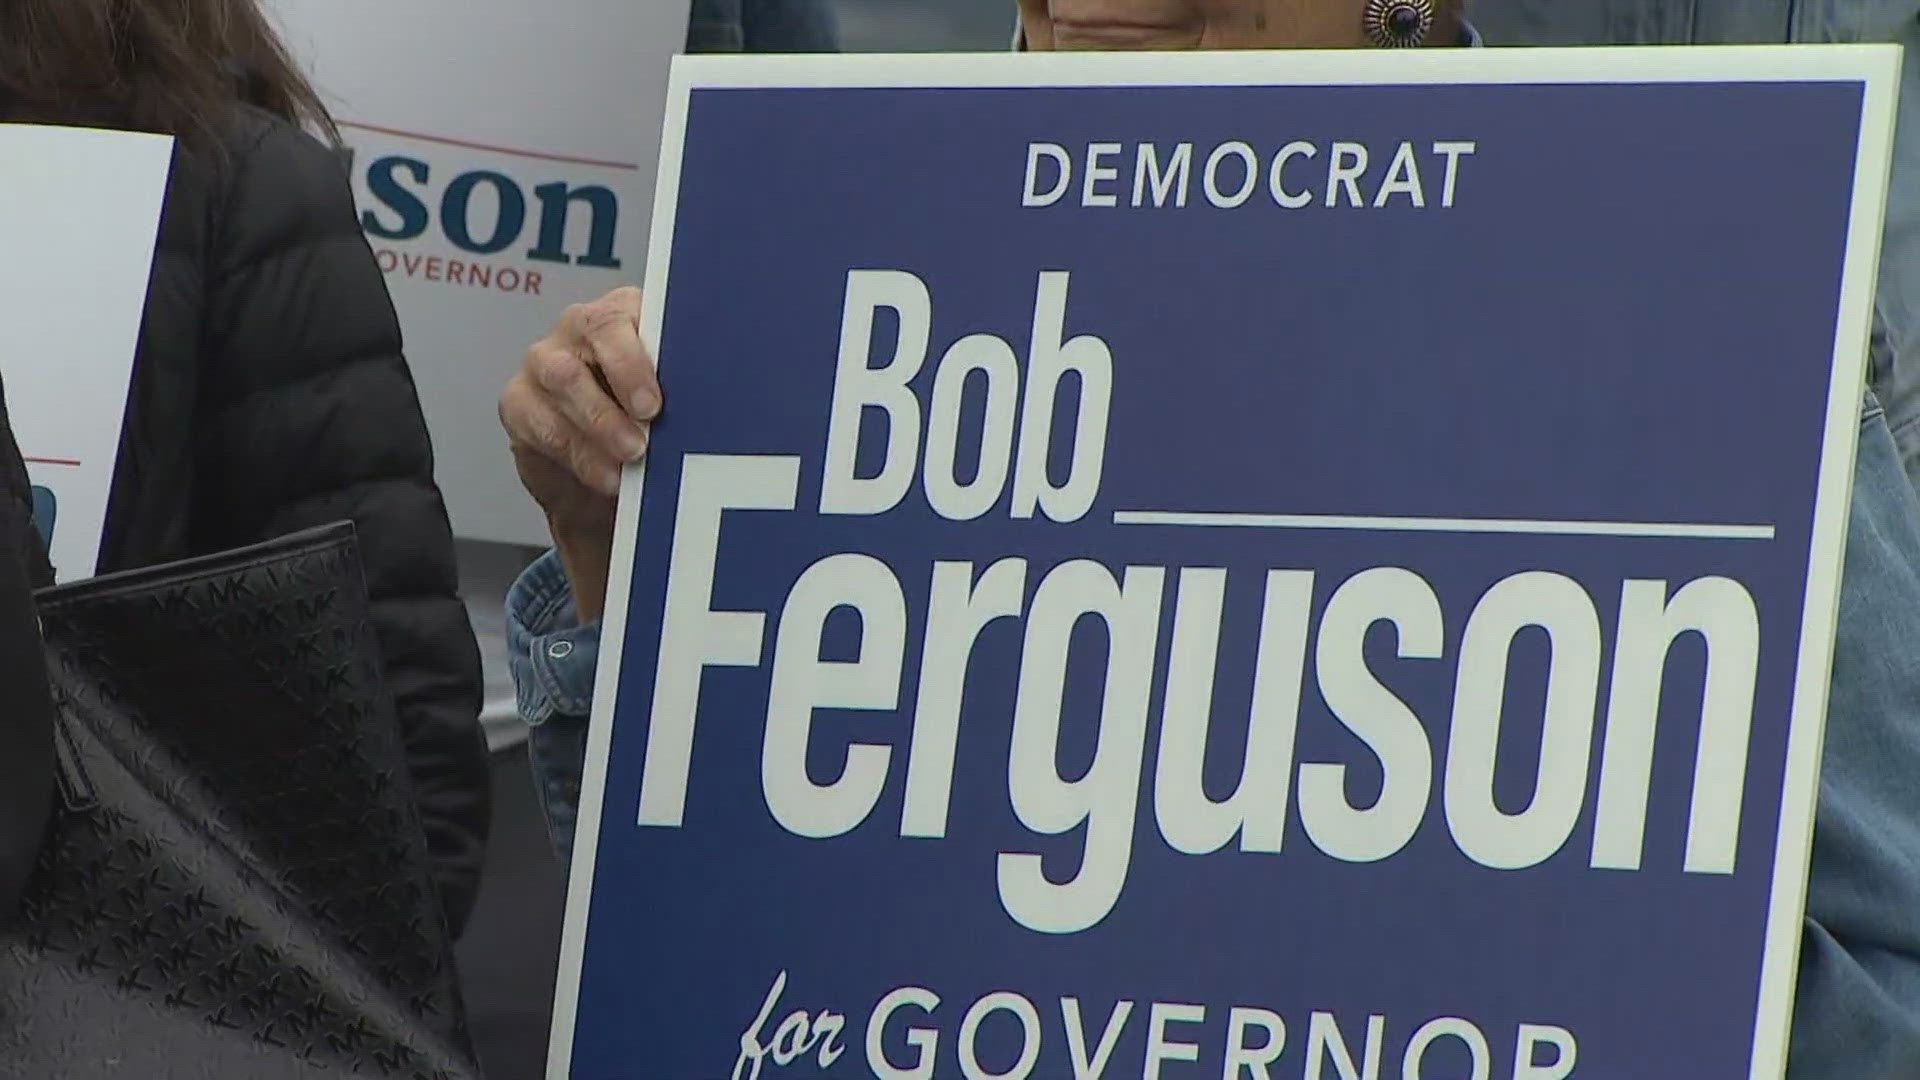 Two other men named "Bob Ferguson", in addition to the state's Attorney General, filed paperwork to get their names on the Washington gubernatorial ballot